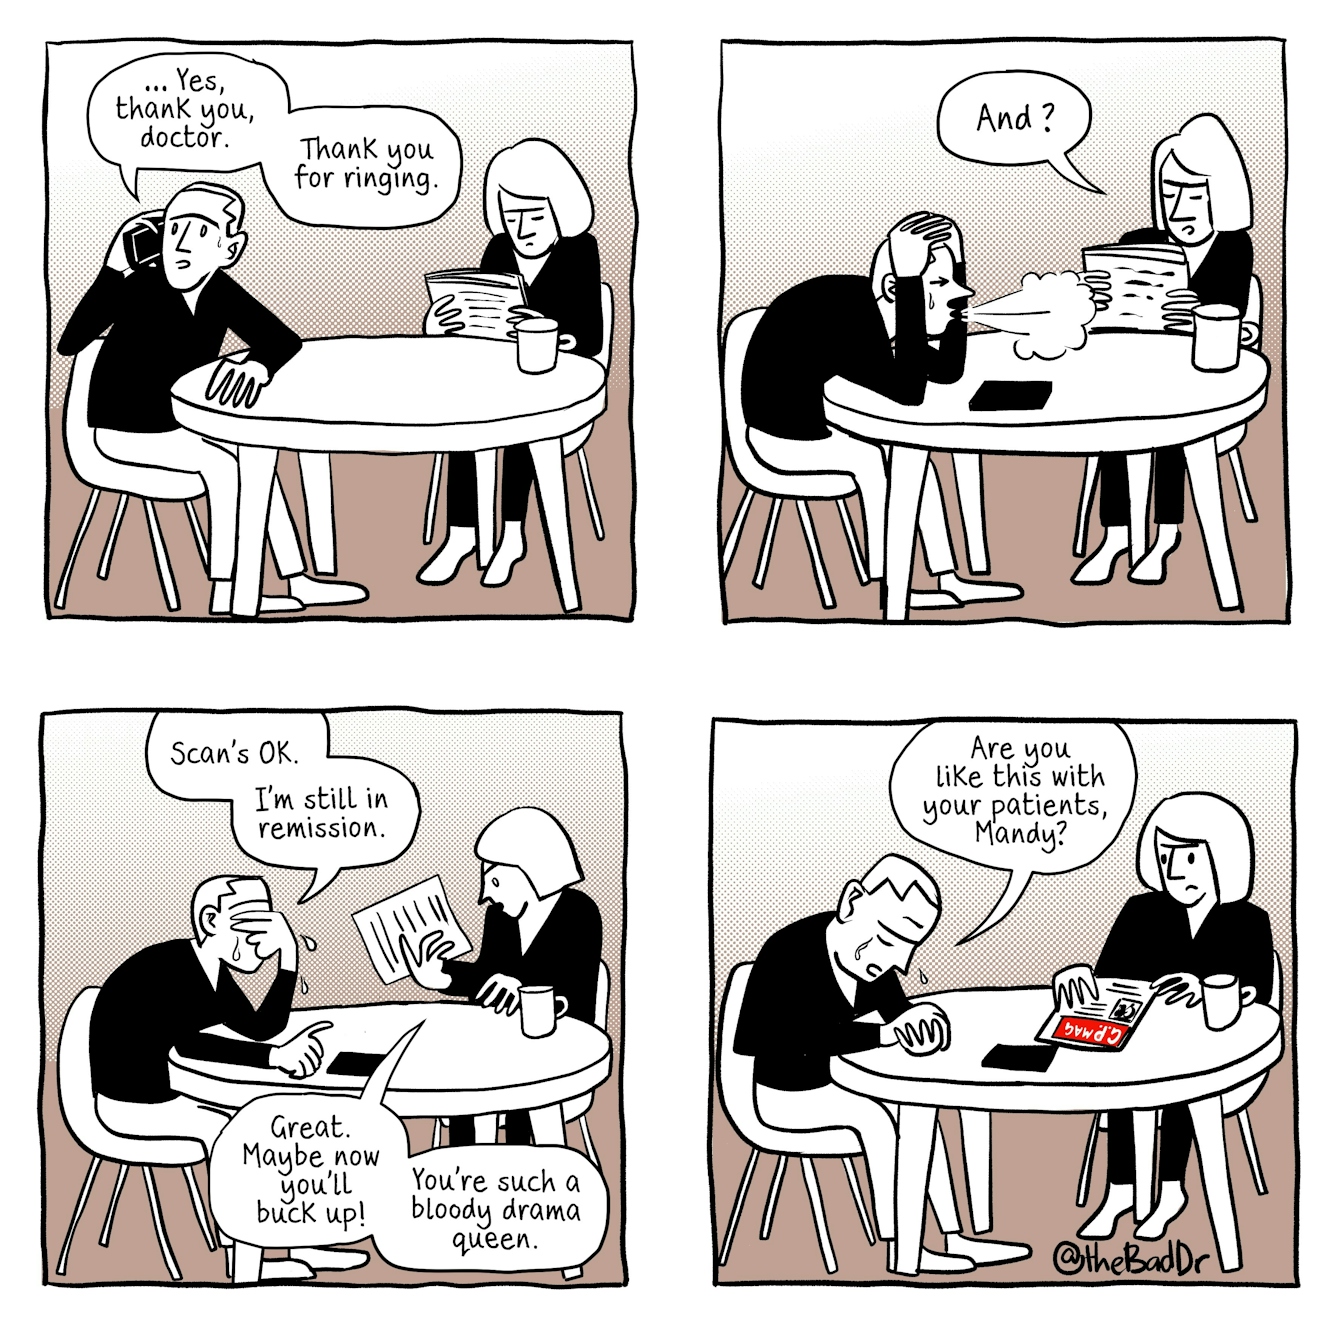 A four panel comic. 

The first panel shows a man and woman sat at a table. The woman is concentrating on a newspaper. The man is speaking on the phone, and looks distressed, with wide eyes and a bead of sweat running down his face. A speech bubble comes from him and reads '... Yes thank you, doctor. Thank you for ringing.' 

The second panel shows the same two characters. The man has hung up the phone, which is now sat on the table. He breathes out a visible sigh of relief and is resting his head and elbows on the table. The woman continues to read her newspaper. A speech bubble from her reads 'And?' 

The third panel shows the same two characters. The man is slumped over, covering his face with his hand, and tears of relief are running off his face. Speech from him reads 'Scan's OK. I'm still in remission.' The woman is examining her newspaper. Speech from her reads 'Great.  Maybe now you'll buck up! You're such a bloody drama queen!' 

The fourth panel shows the same two characters. The man is slumped over, with tears running down his face. He looks defeated. Speech from him reads 'Are you like this with your patients, Mandy?' The woman is looking up at the man sheepishly. 